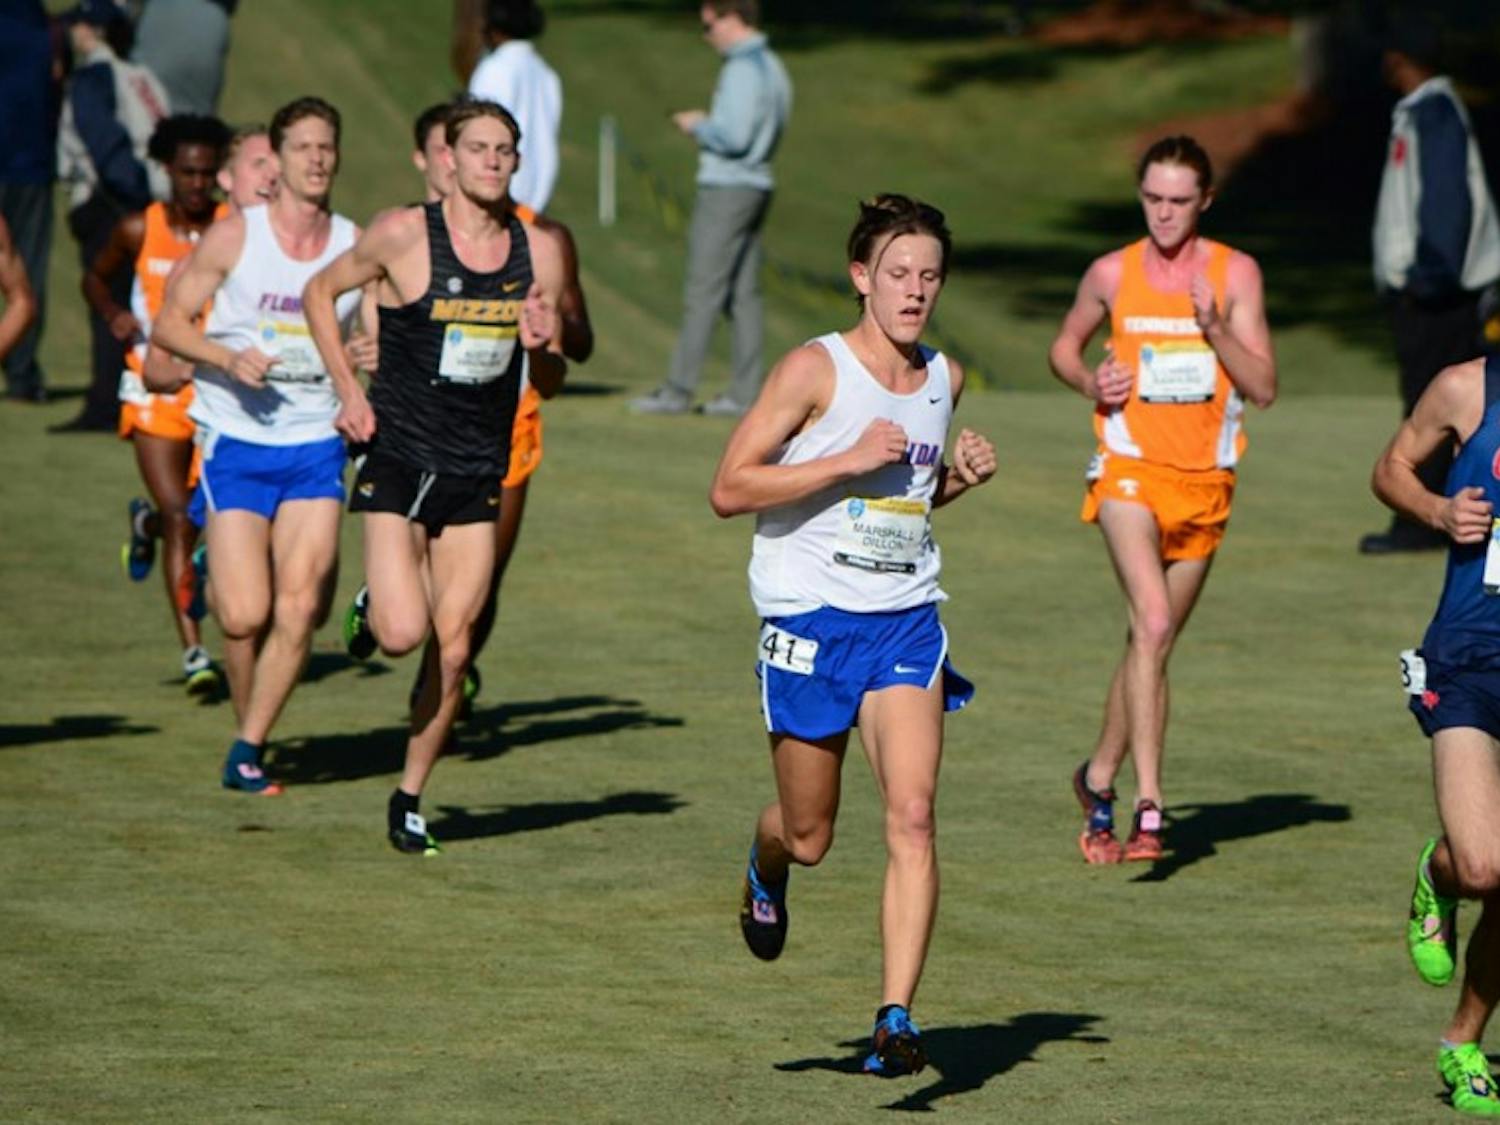 UF runner Marshall Dillon led all Florida runners with a personal-best time of 25:03.9, good enough for 38th place and a spot on the SEC All-Freshman team.